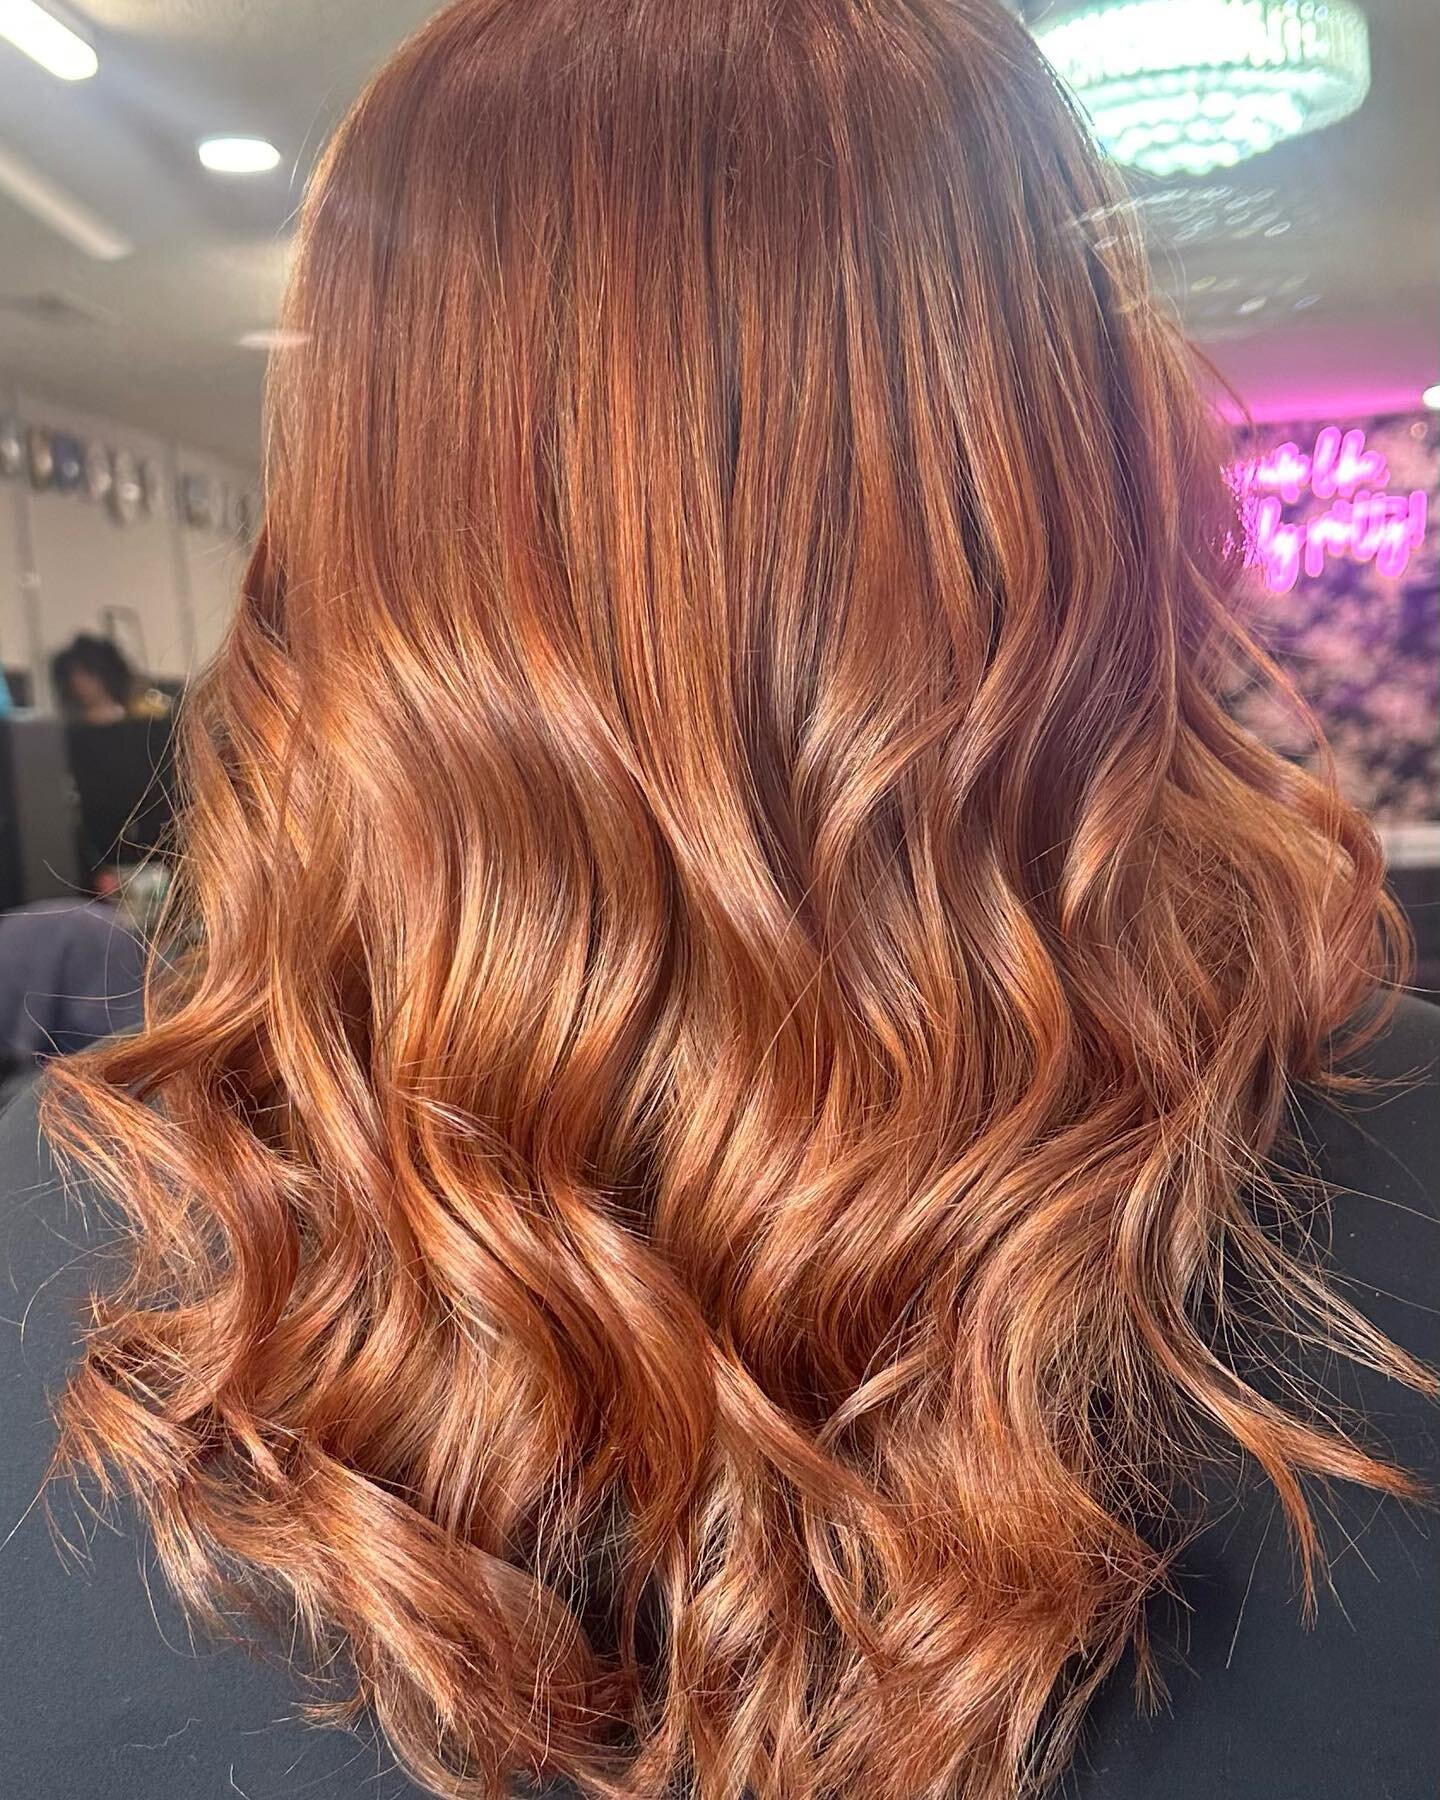 This beautiful copper was created by Maddie  using #alfaparf evolution of color and styled using #davines and #leafandflower products. Swipe to see where we started. We have openings, come see us! 

Book online at www.salonfix.net/book

#alfaparfmila